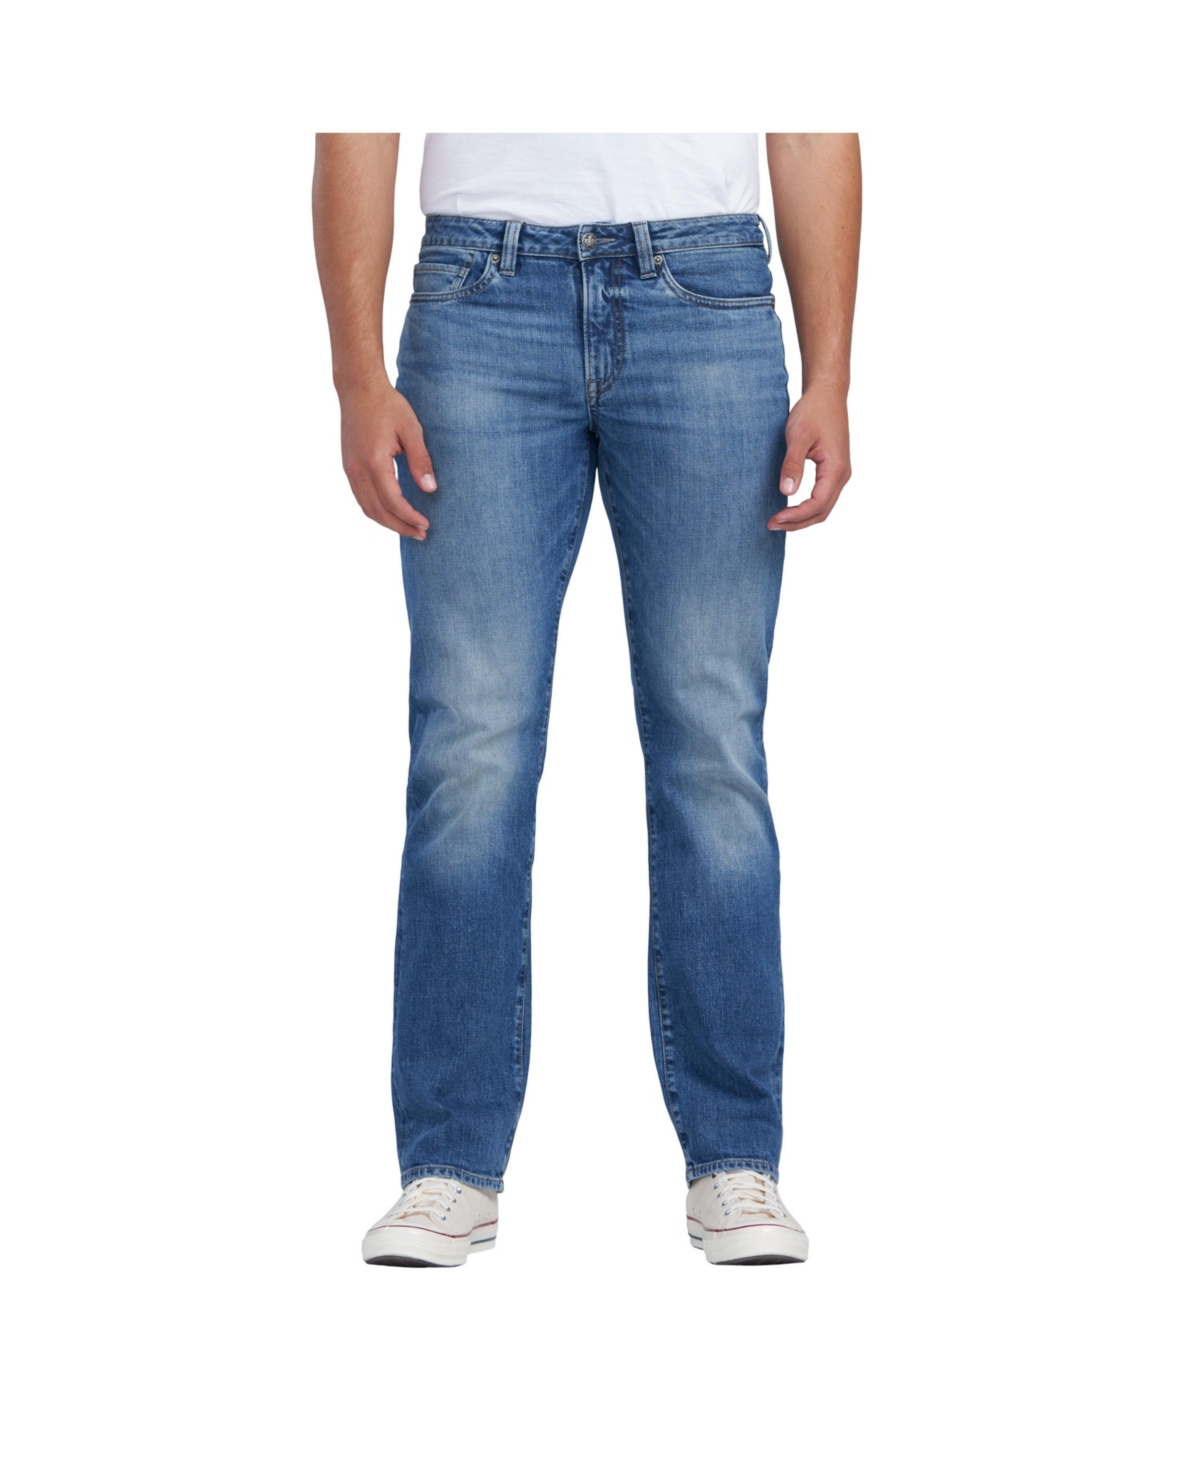 Buffalo Men's Relaxed Straight Driven Crinkled and Sanded Jeans - Indigo